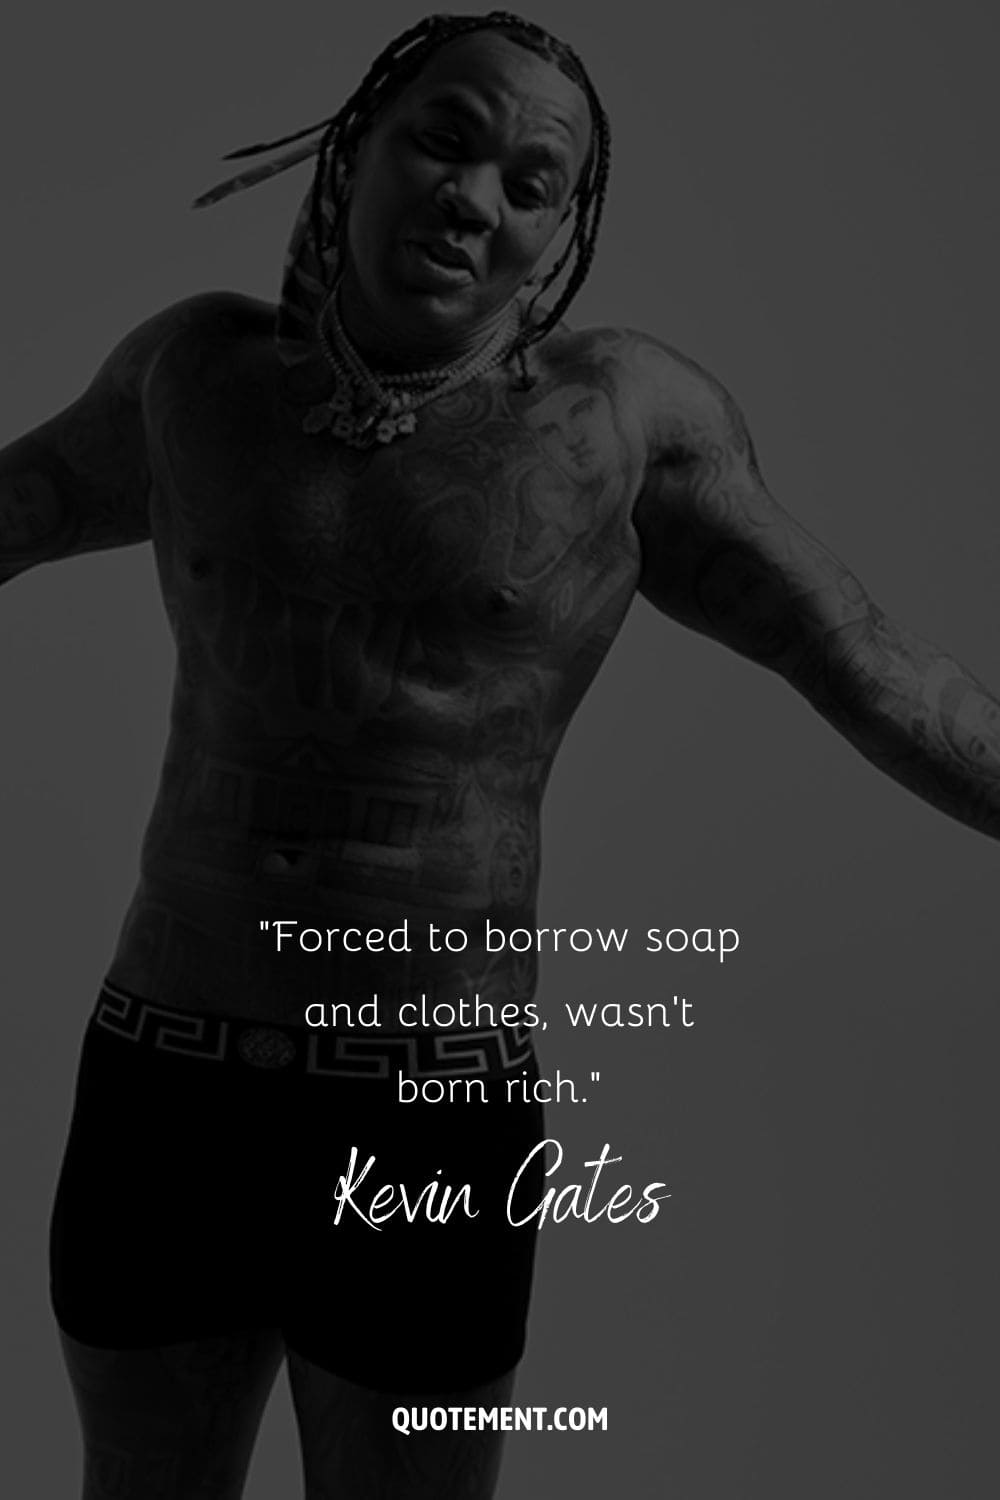 “Forced to borrow soap and clothes, wasn't born rich.” – Kevin Gates